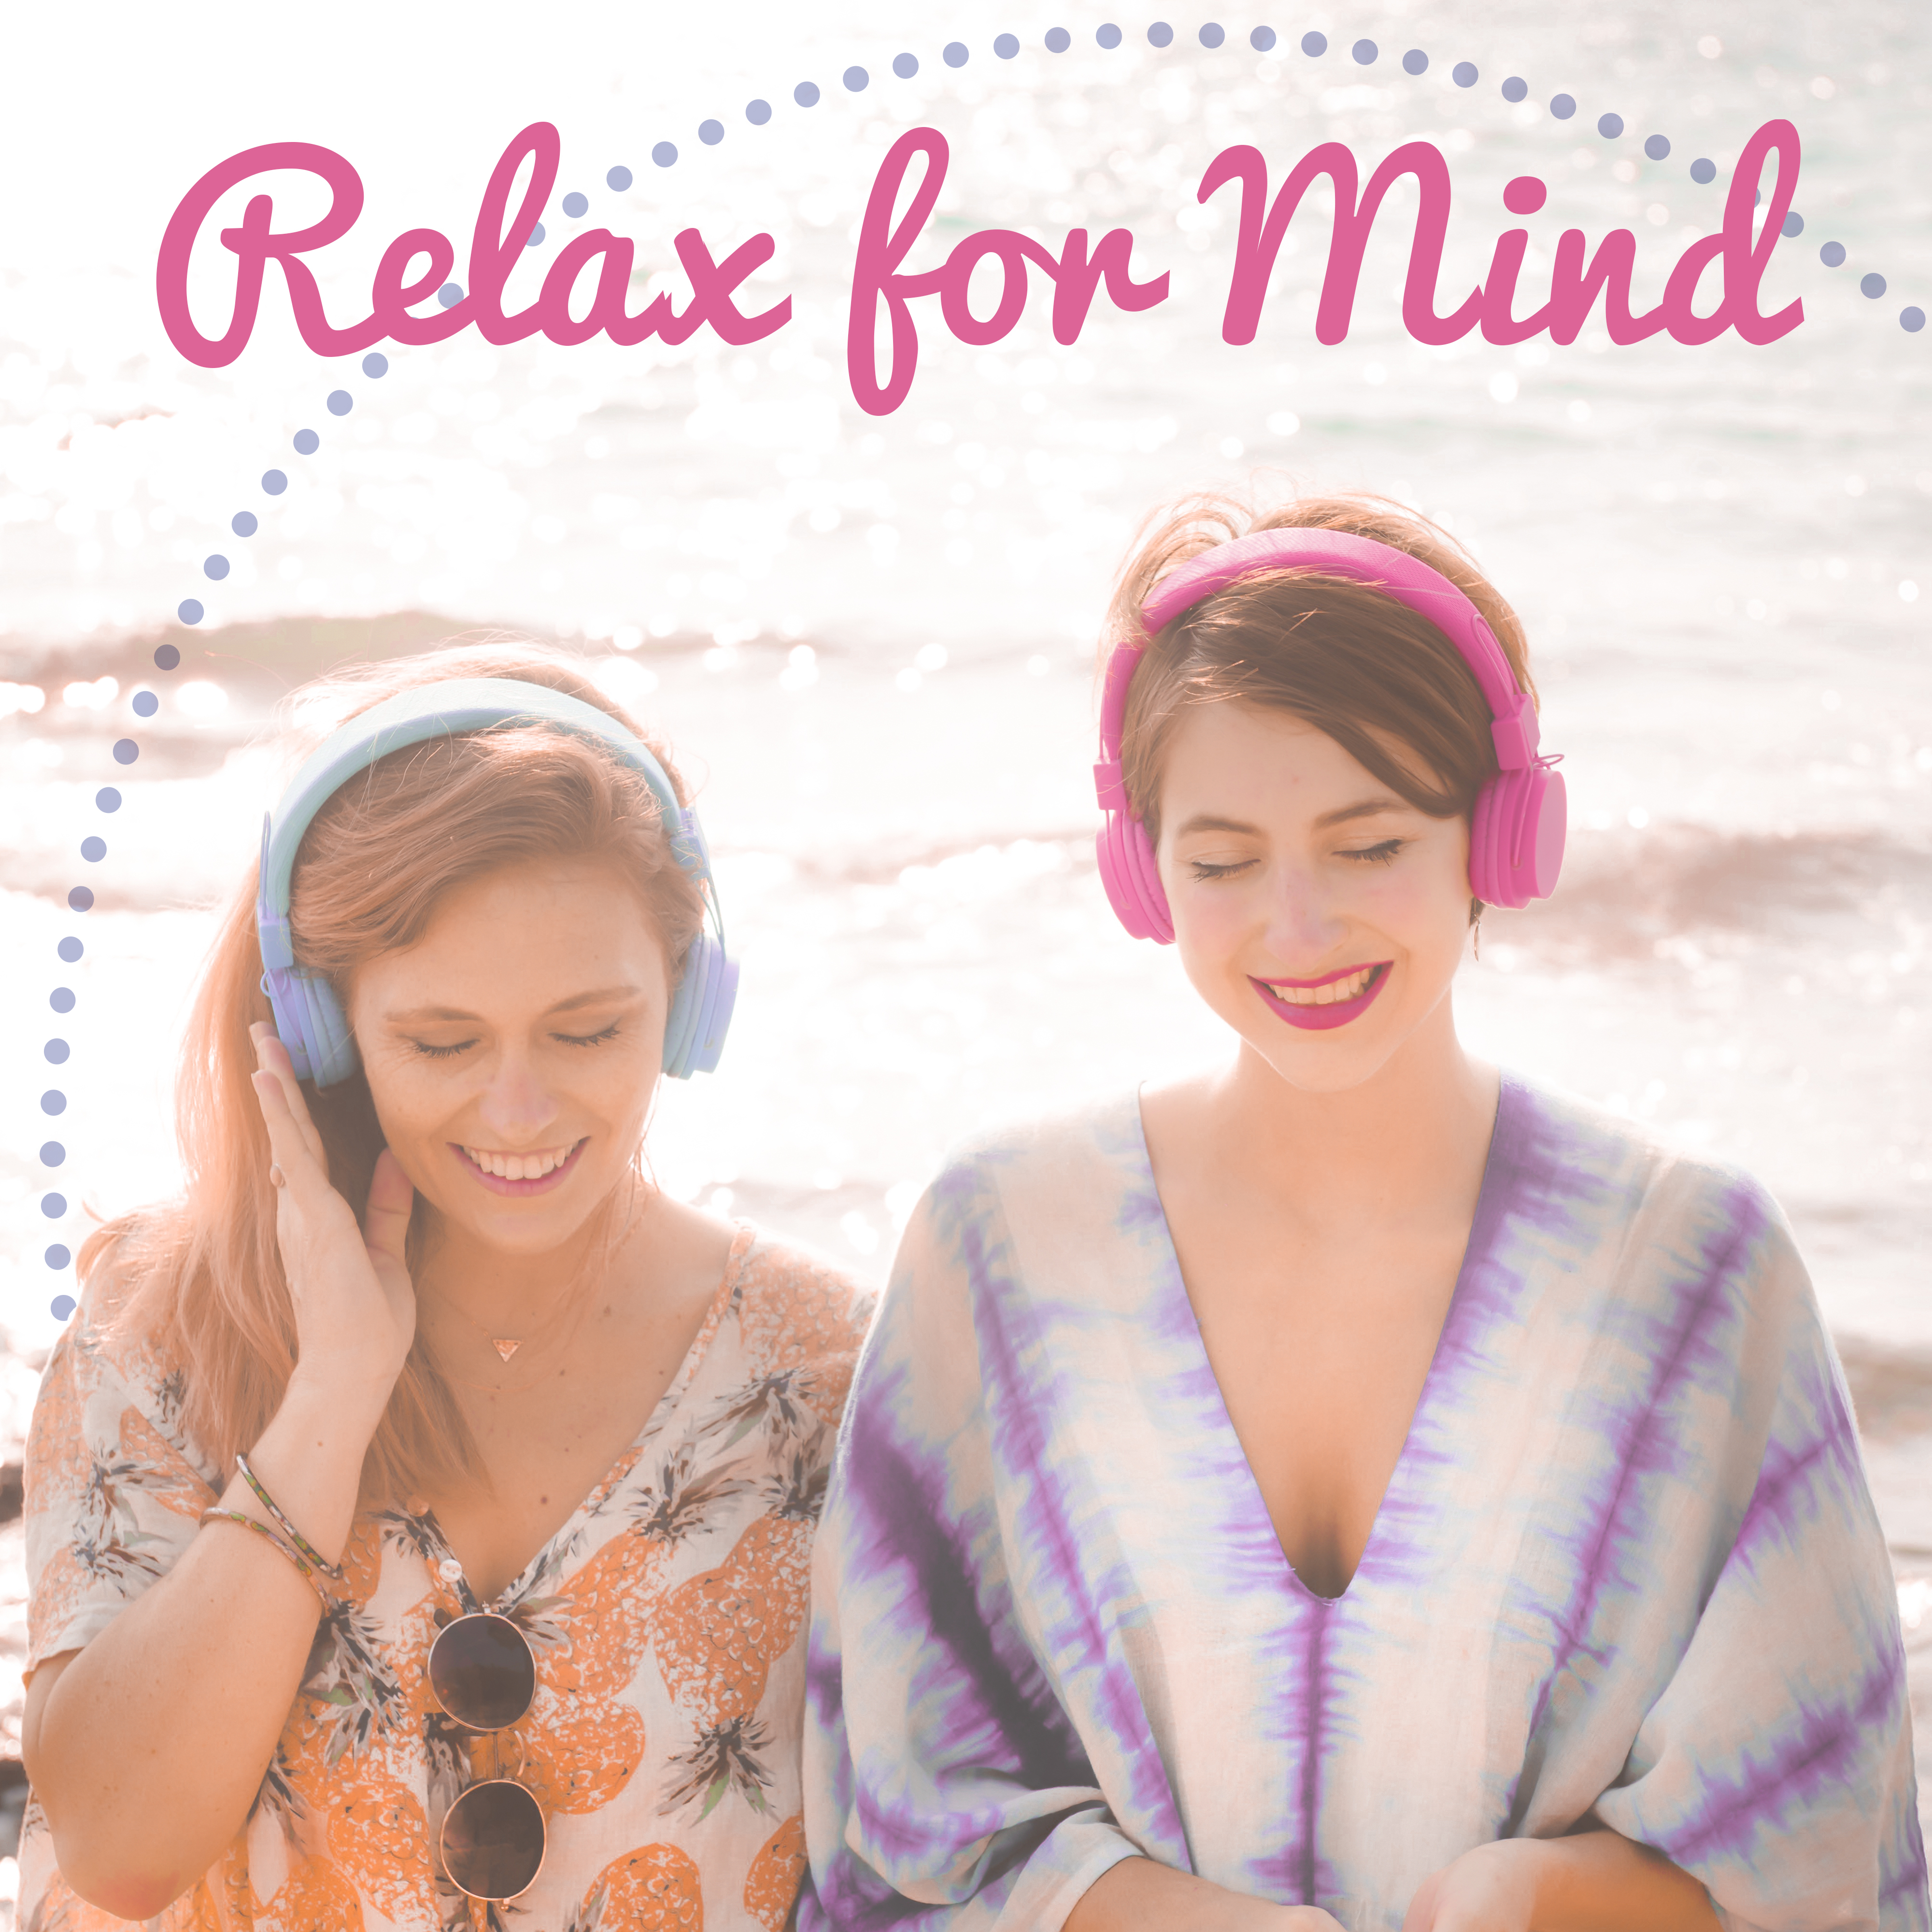 Relax for Mind – Peaceful Sounds to Calm Down, Deep Meditation, Contemplation of Nature, Pure Mind, Soft New Age Music, Nature Sounds to Rest